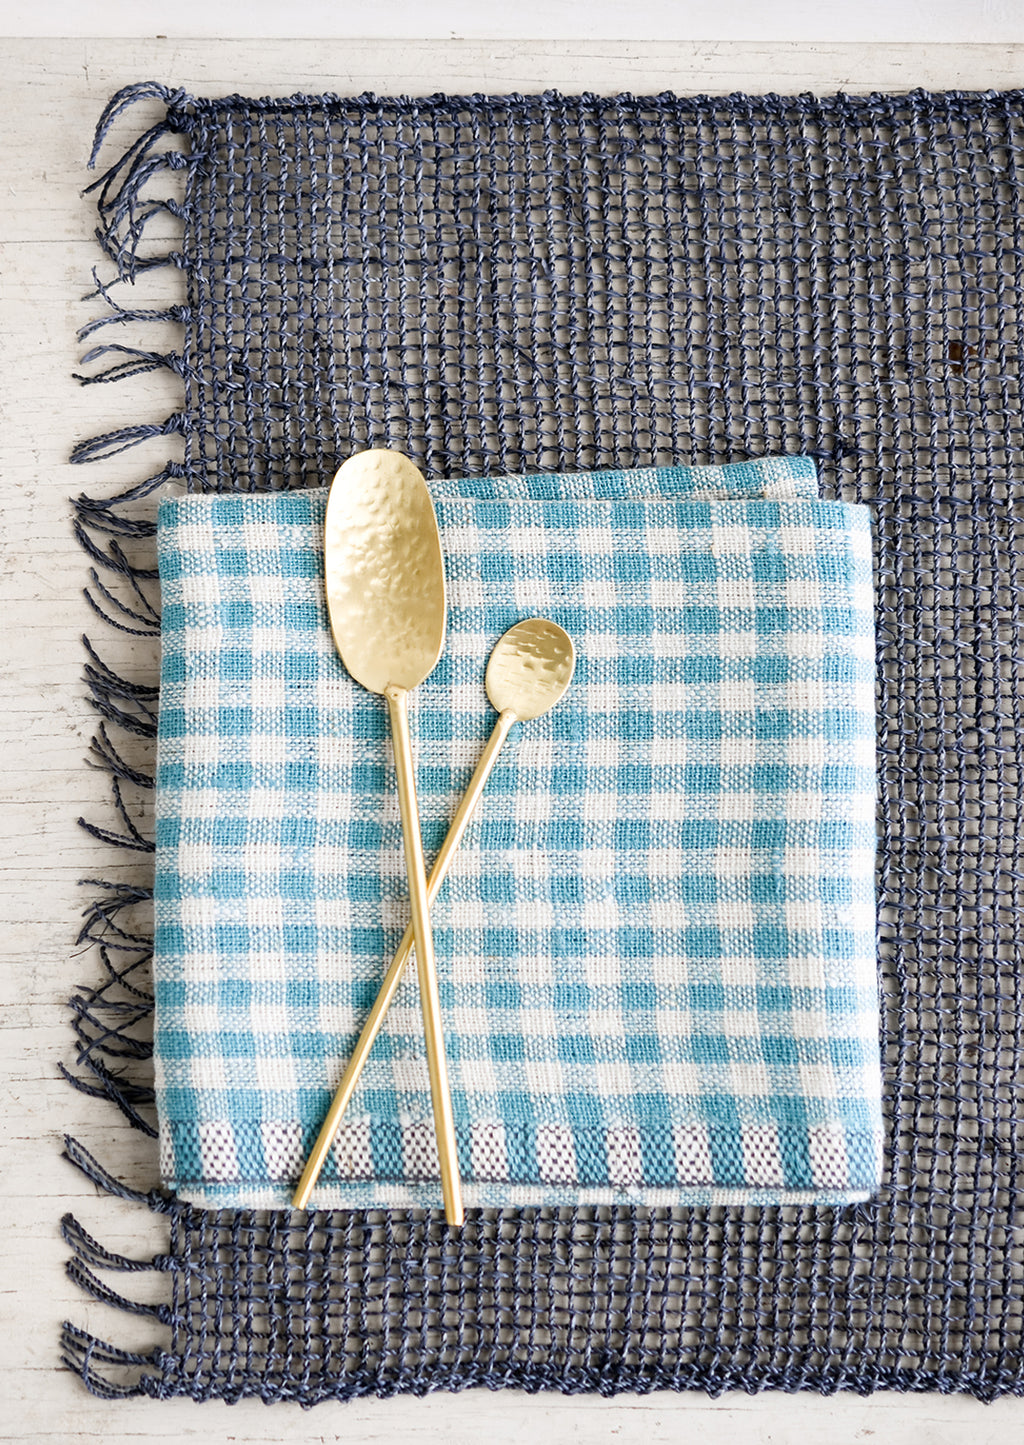 2: A blue-grey woven straw placemat with gingham napkin and gold spoons.